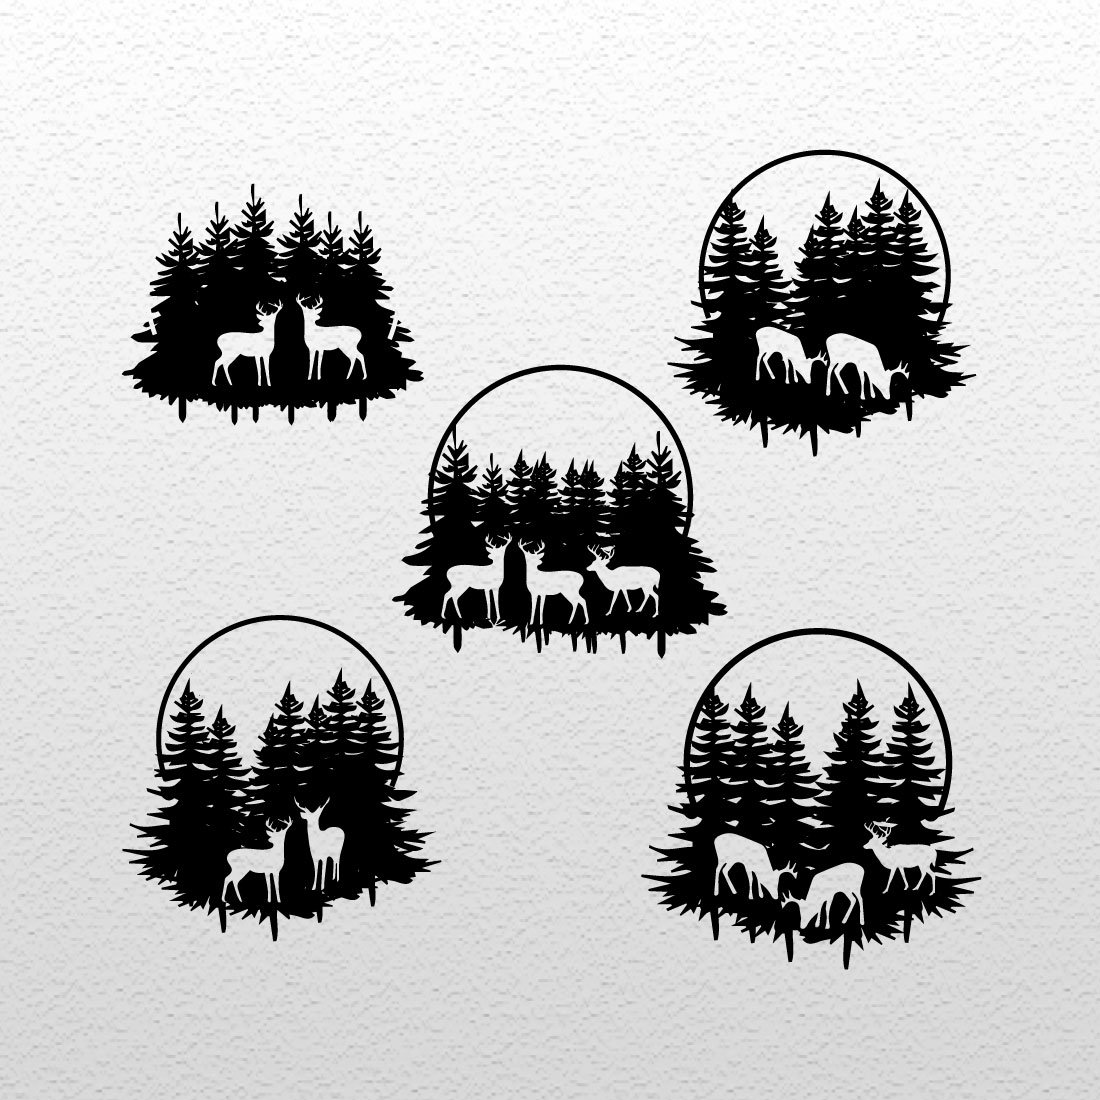 Set of four black and white silhouettes of deer and trees.